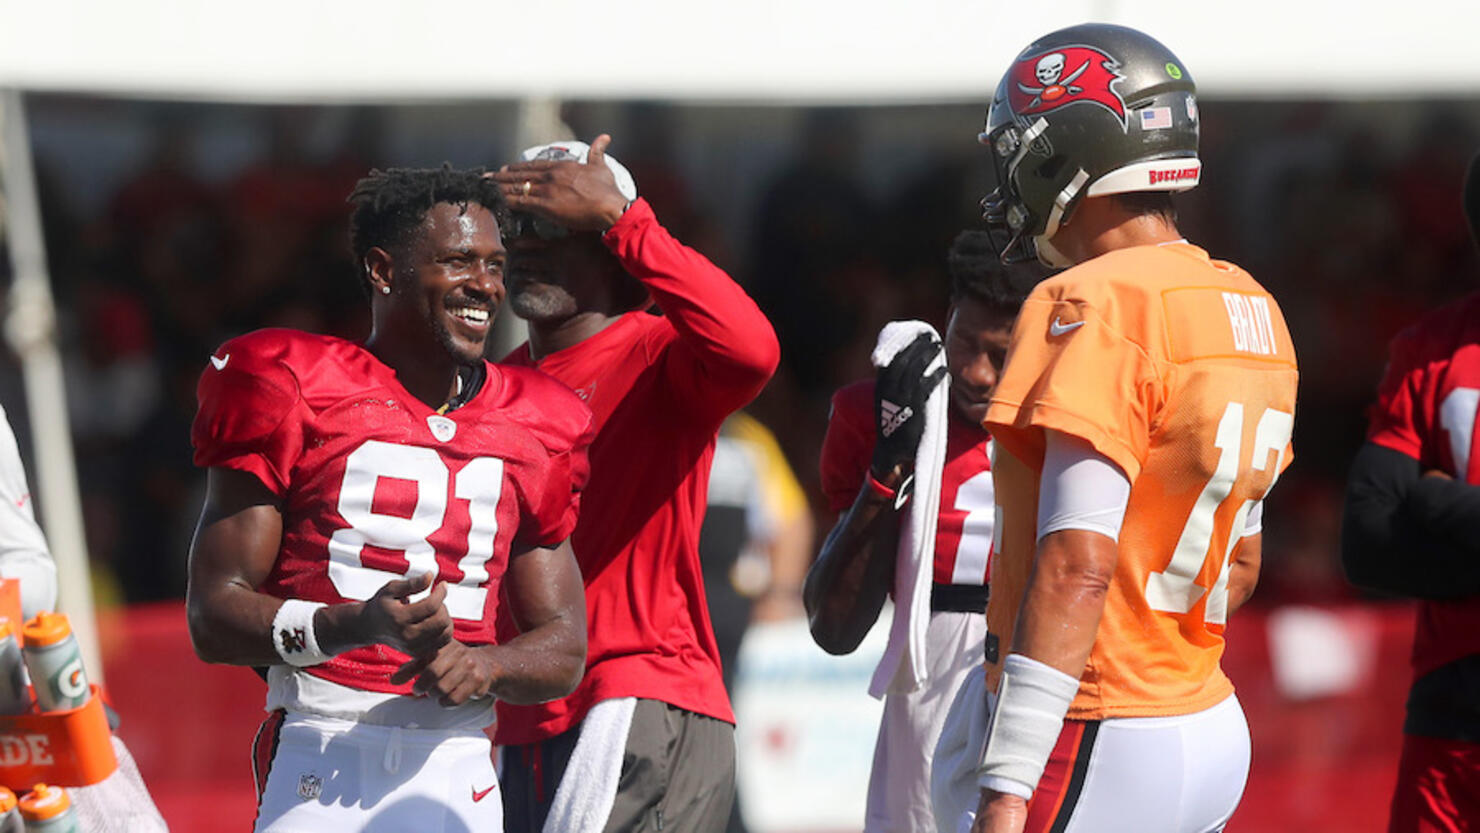 NFL: AUG 18 Buccaneers & Titans Joint Training Camp